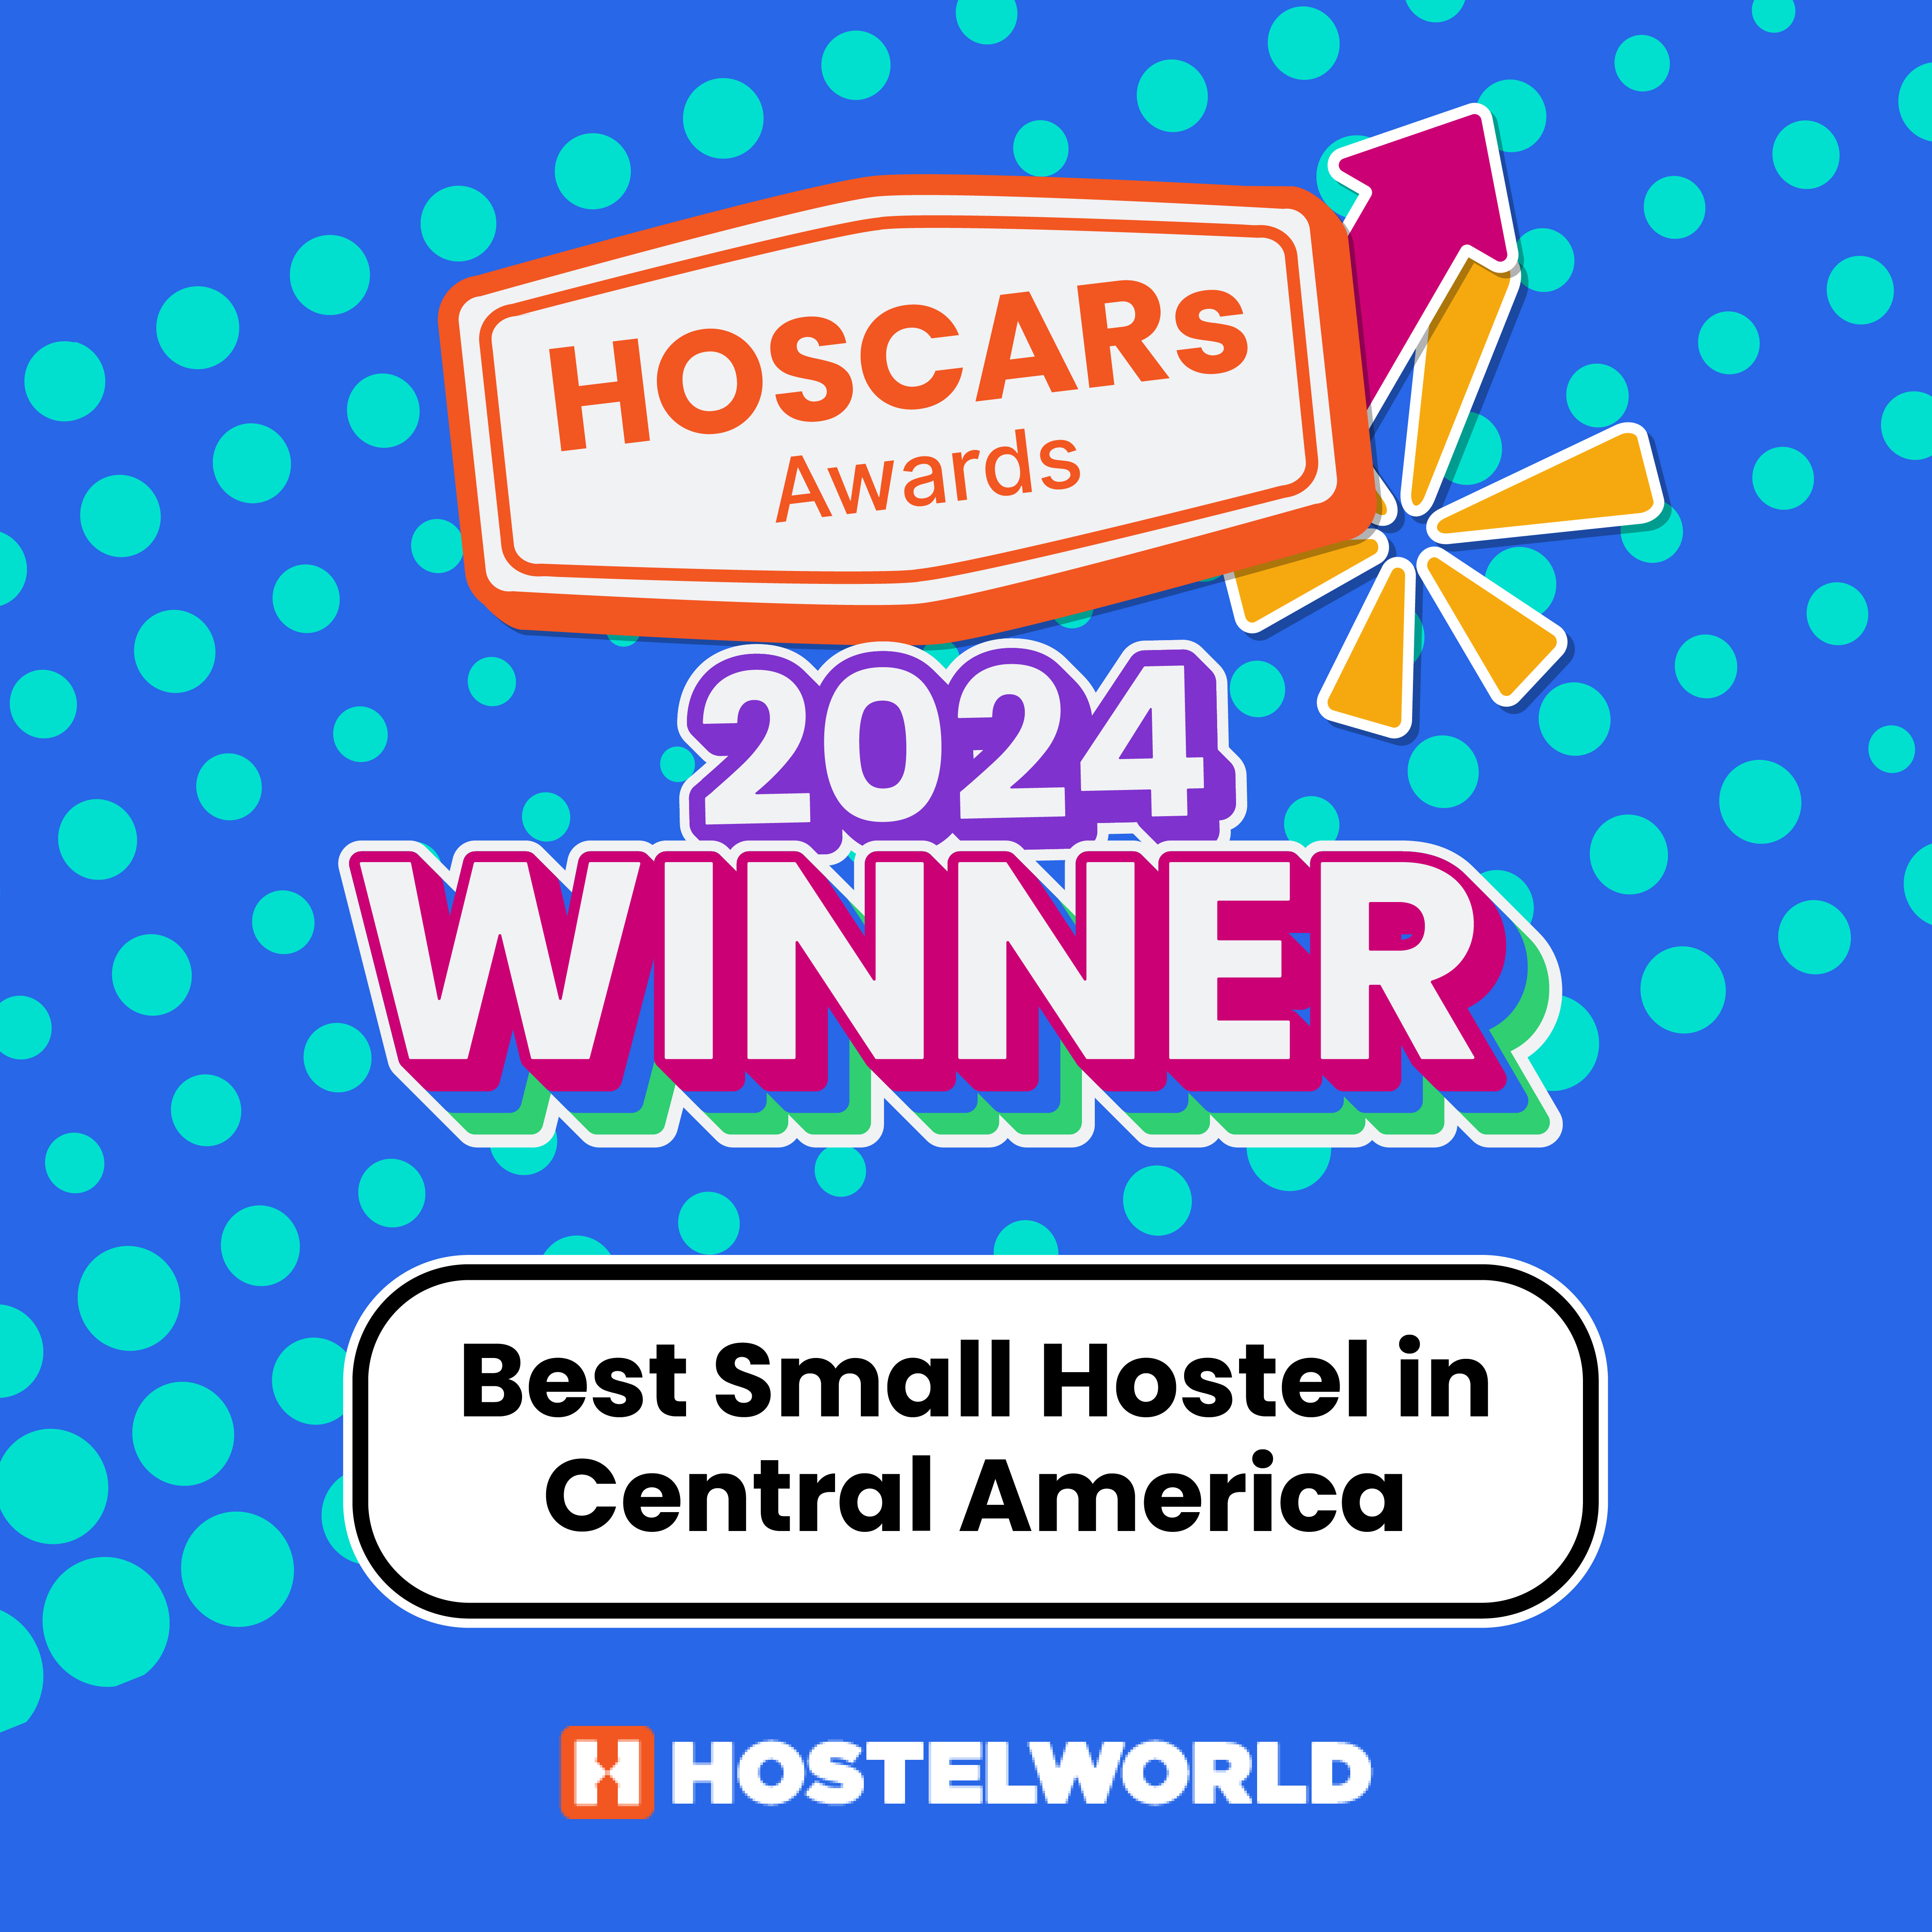 Best Small Hostel in Central America